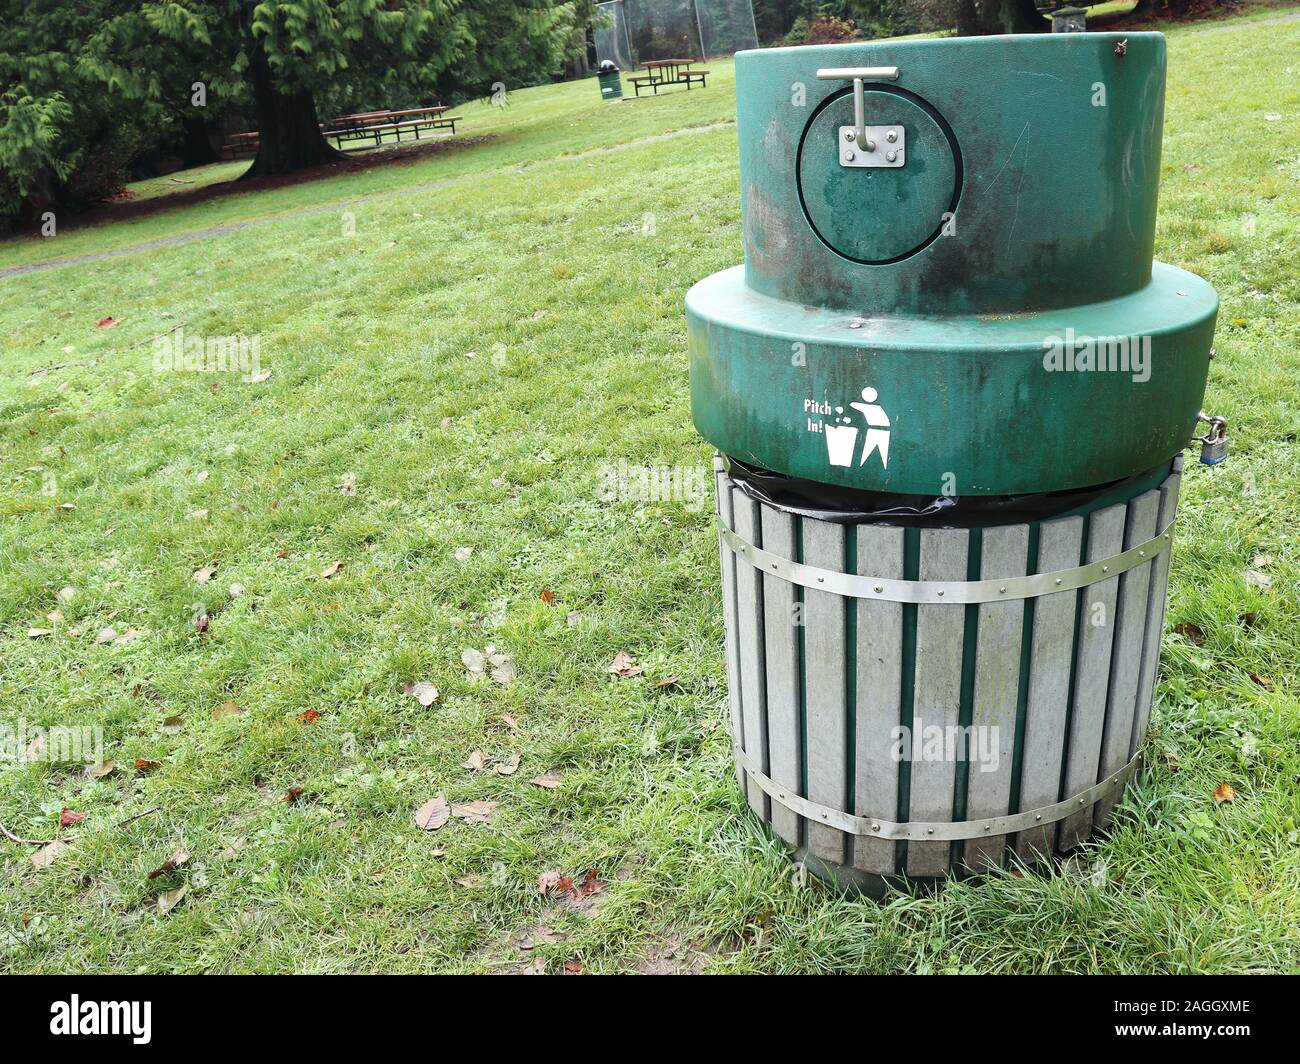 https://c8.alamy.com/comp/2AGGXME/green-garbage-can-with-animal-proof-lid-and-the-words-pitch-in-beside-a-pictogram-of-a-person-dropping-garbage-in-a-bin-on-a-grassy-slope-2AGGXME.jpg